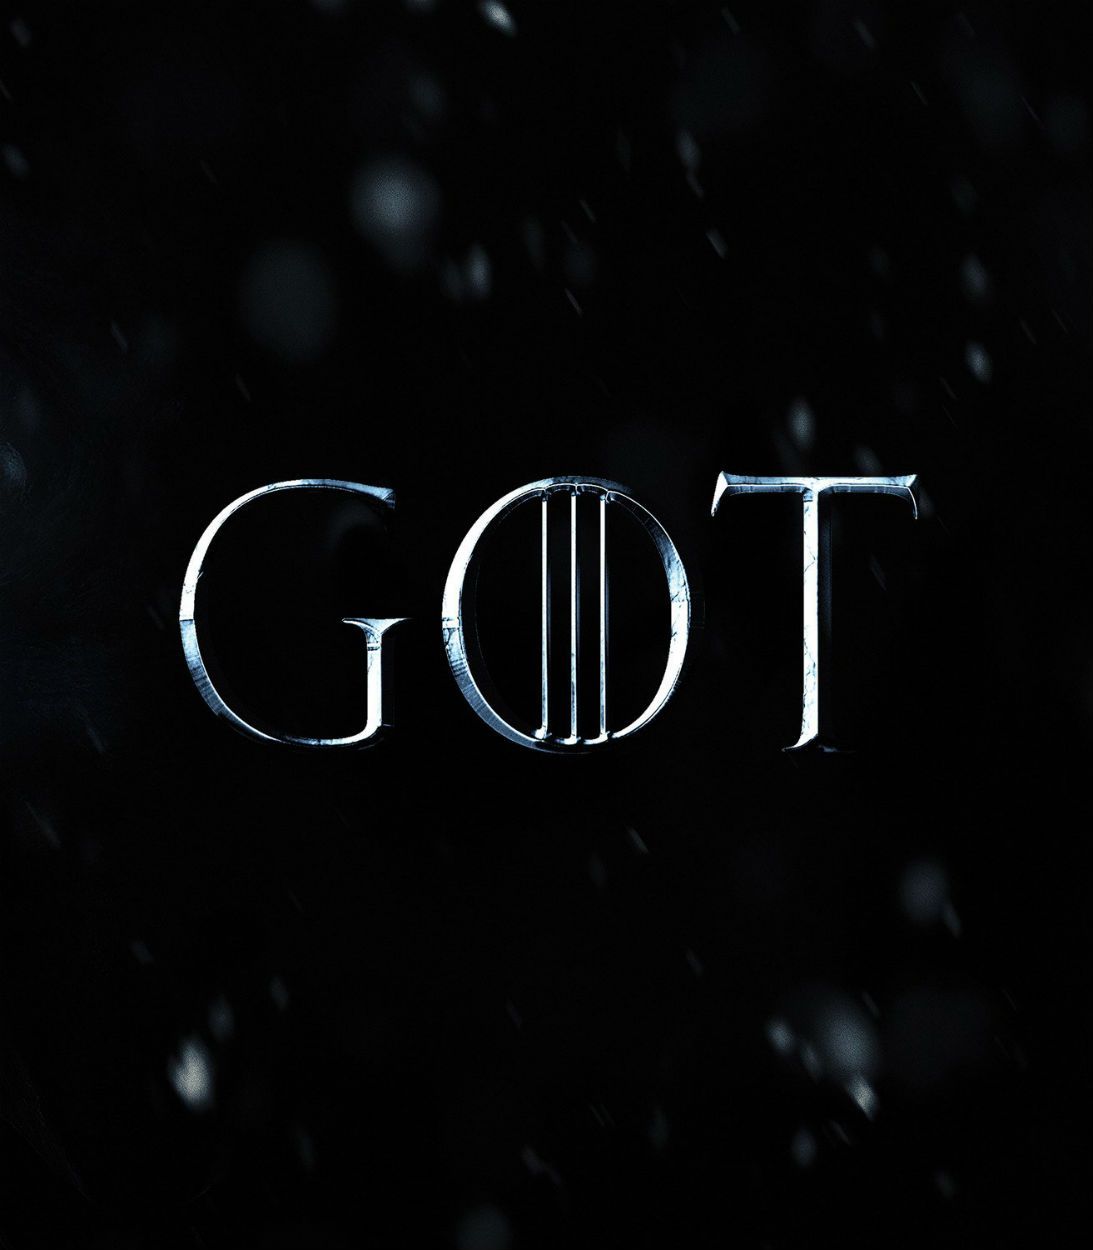 game of thrones title vertical